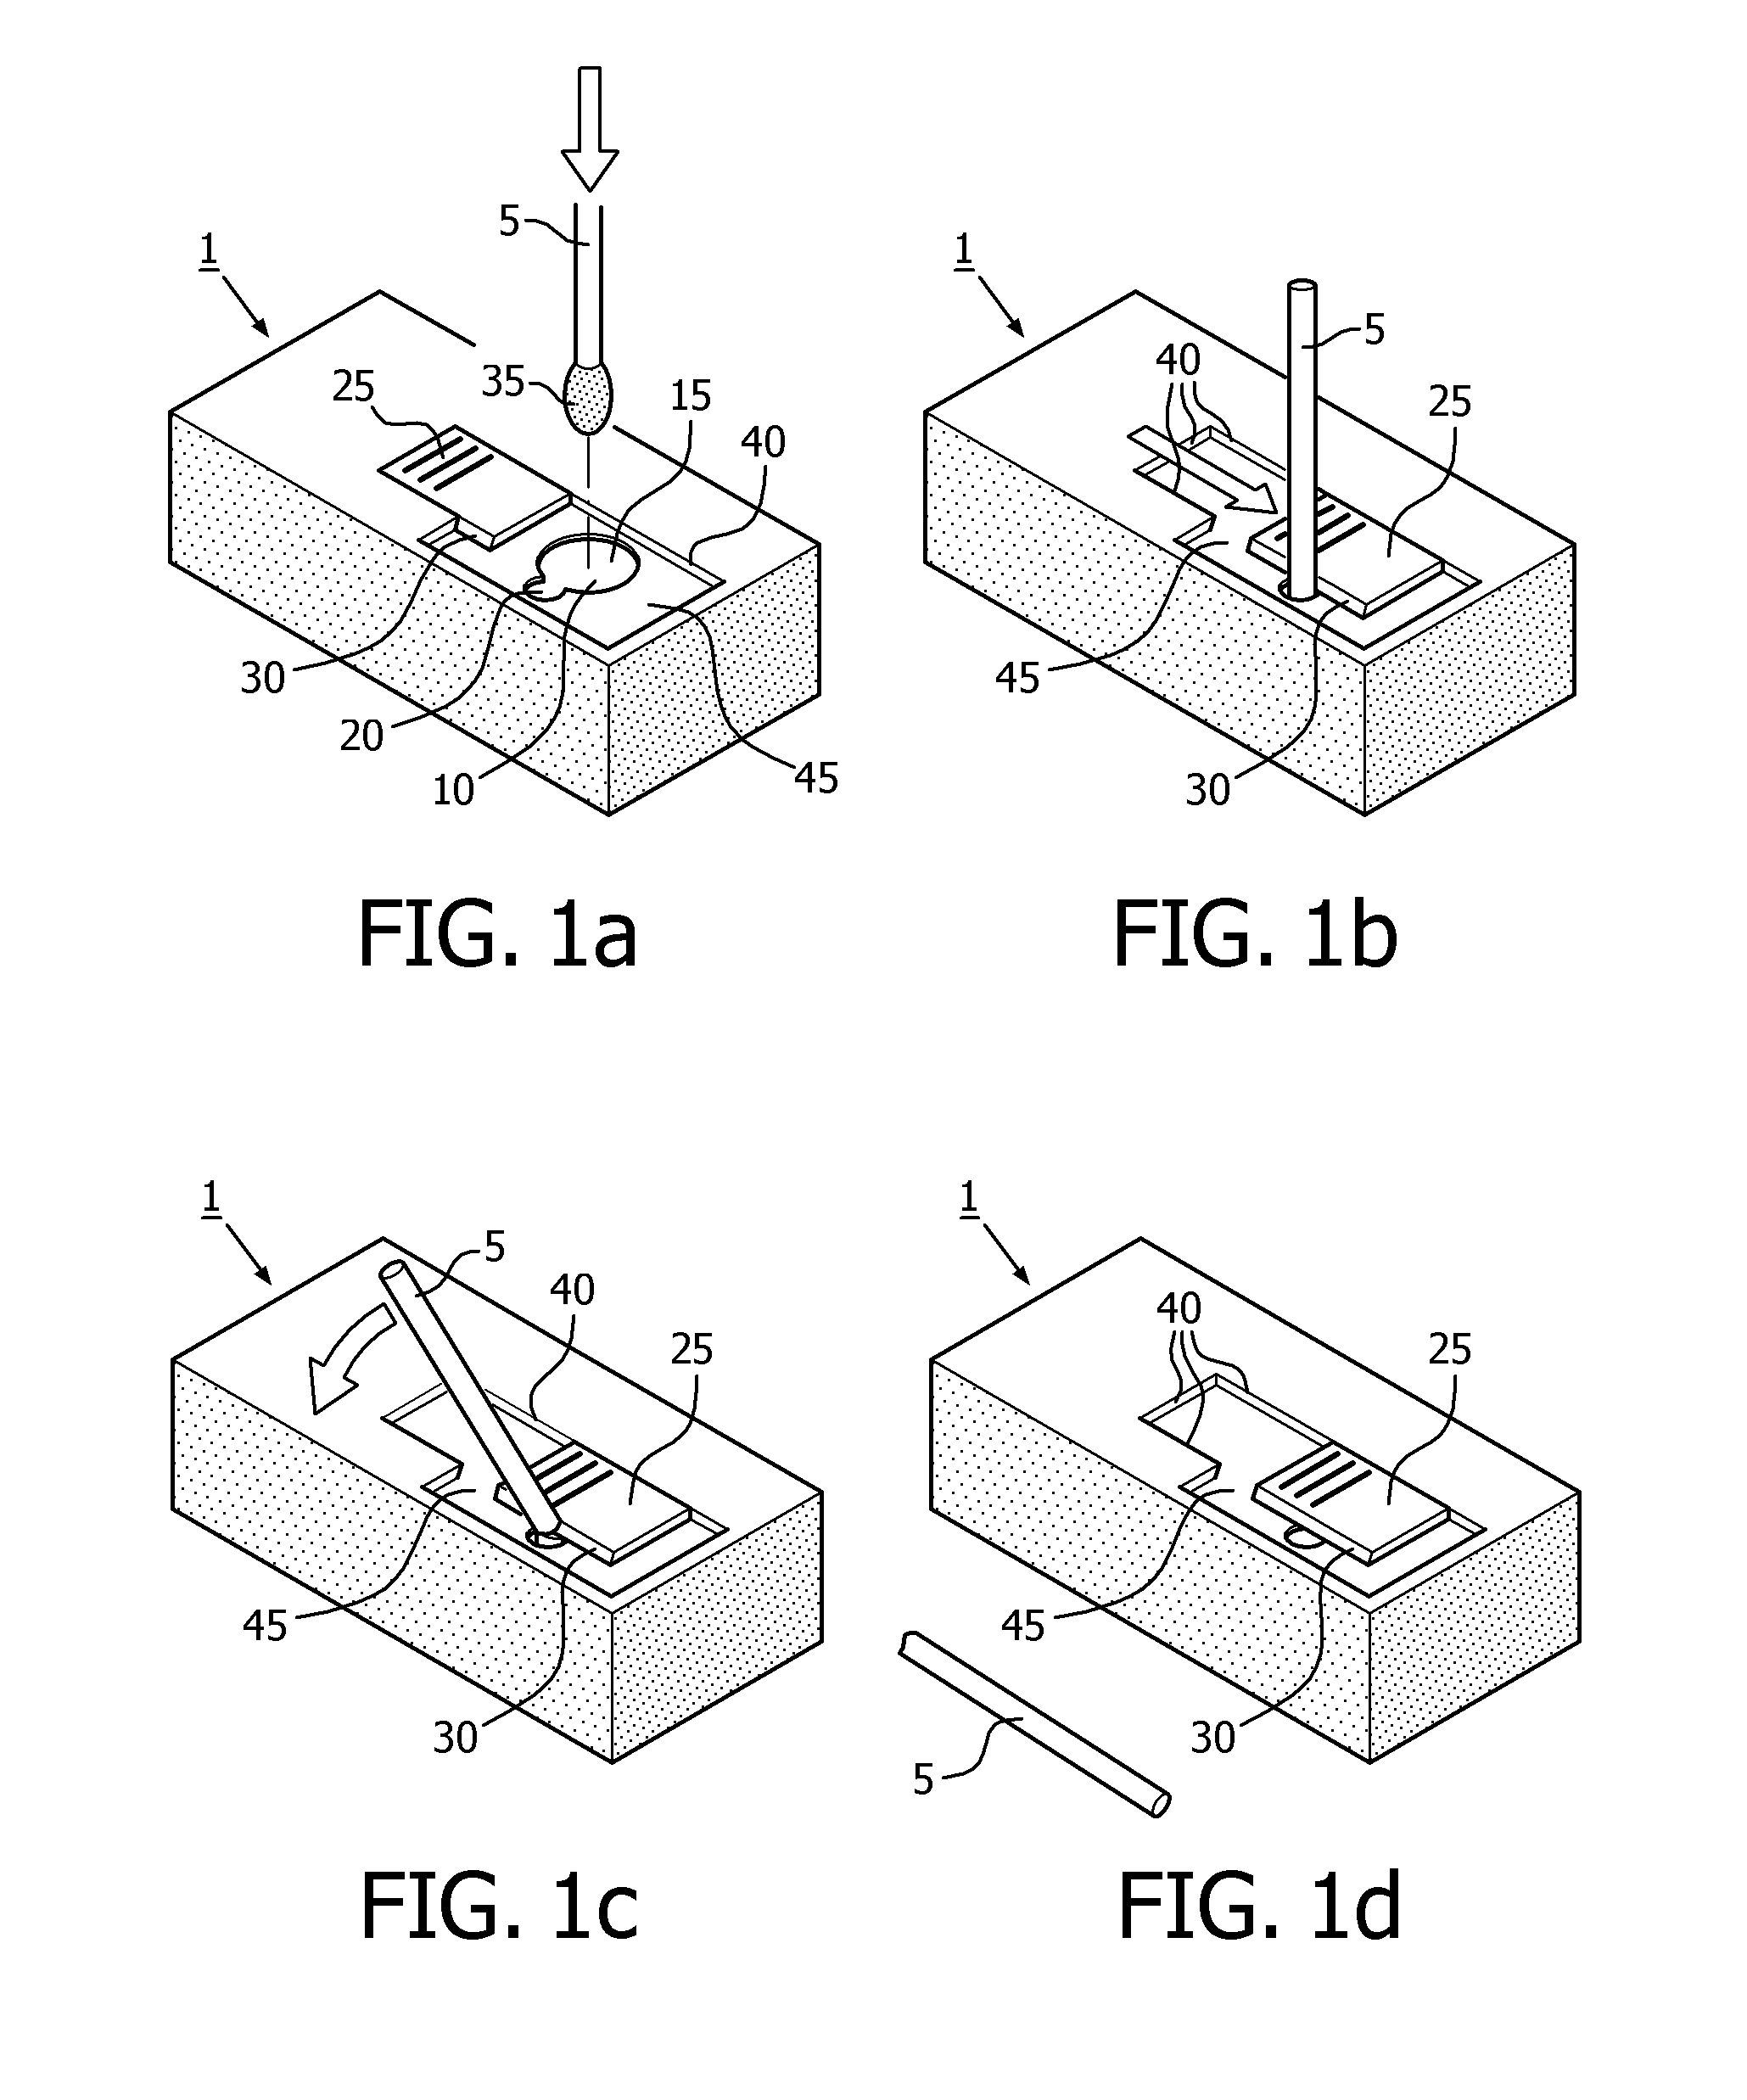 Treatment of a sample with focused acoustic energy